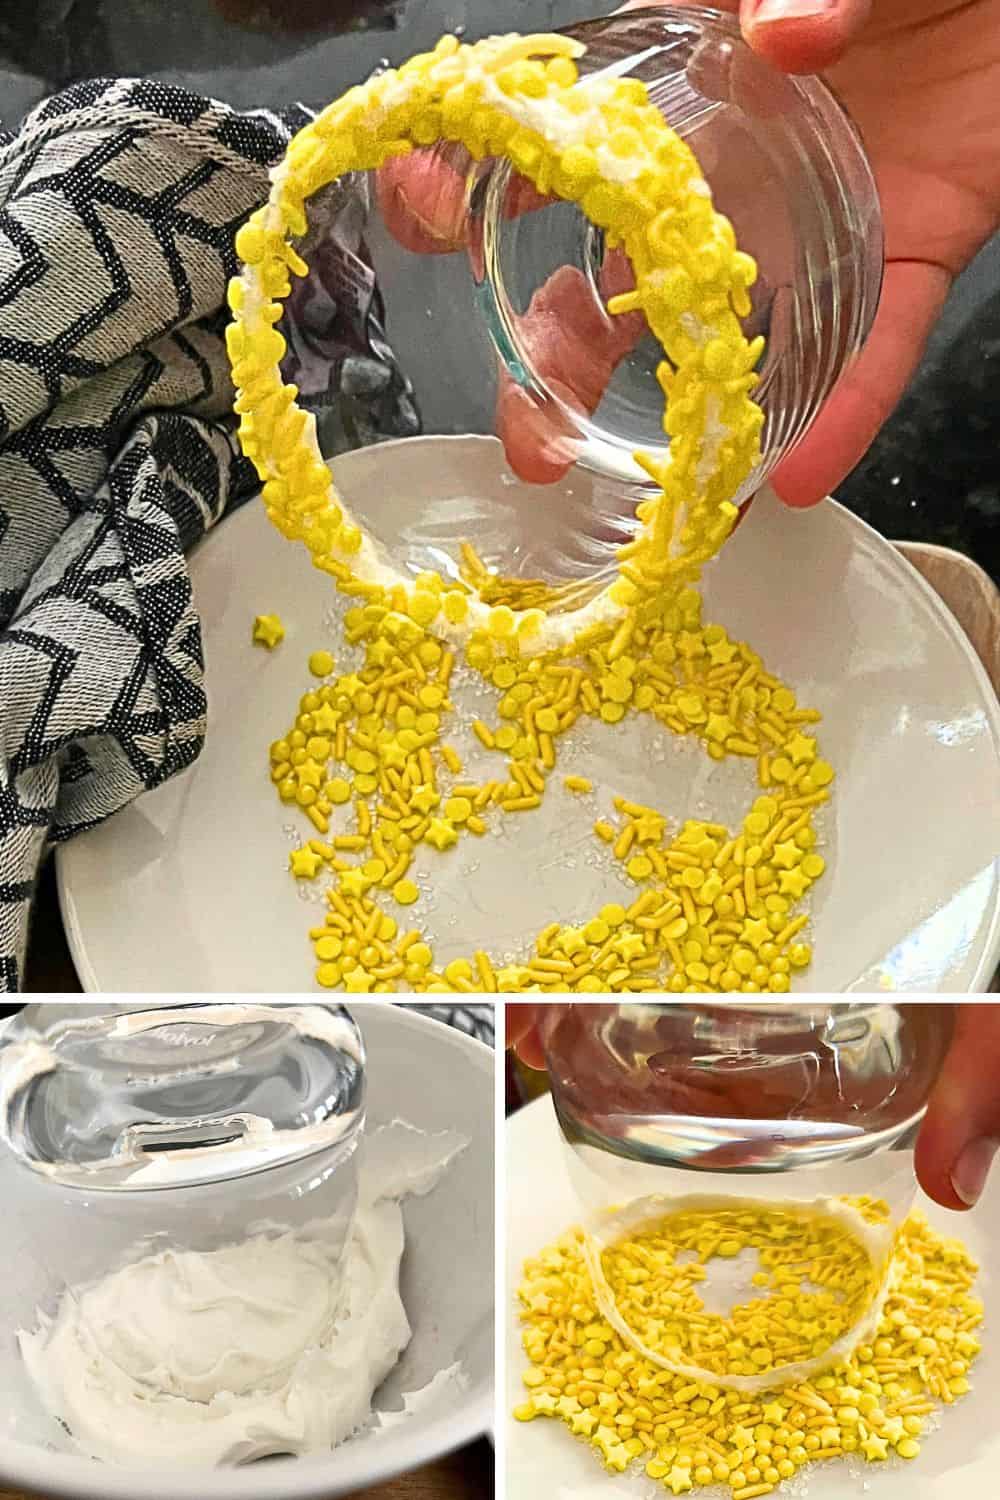 How To Make Sprinkled Rimmed Glasses for Drinks step by step photos